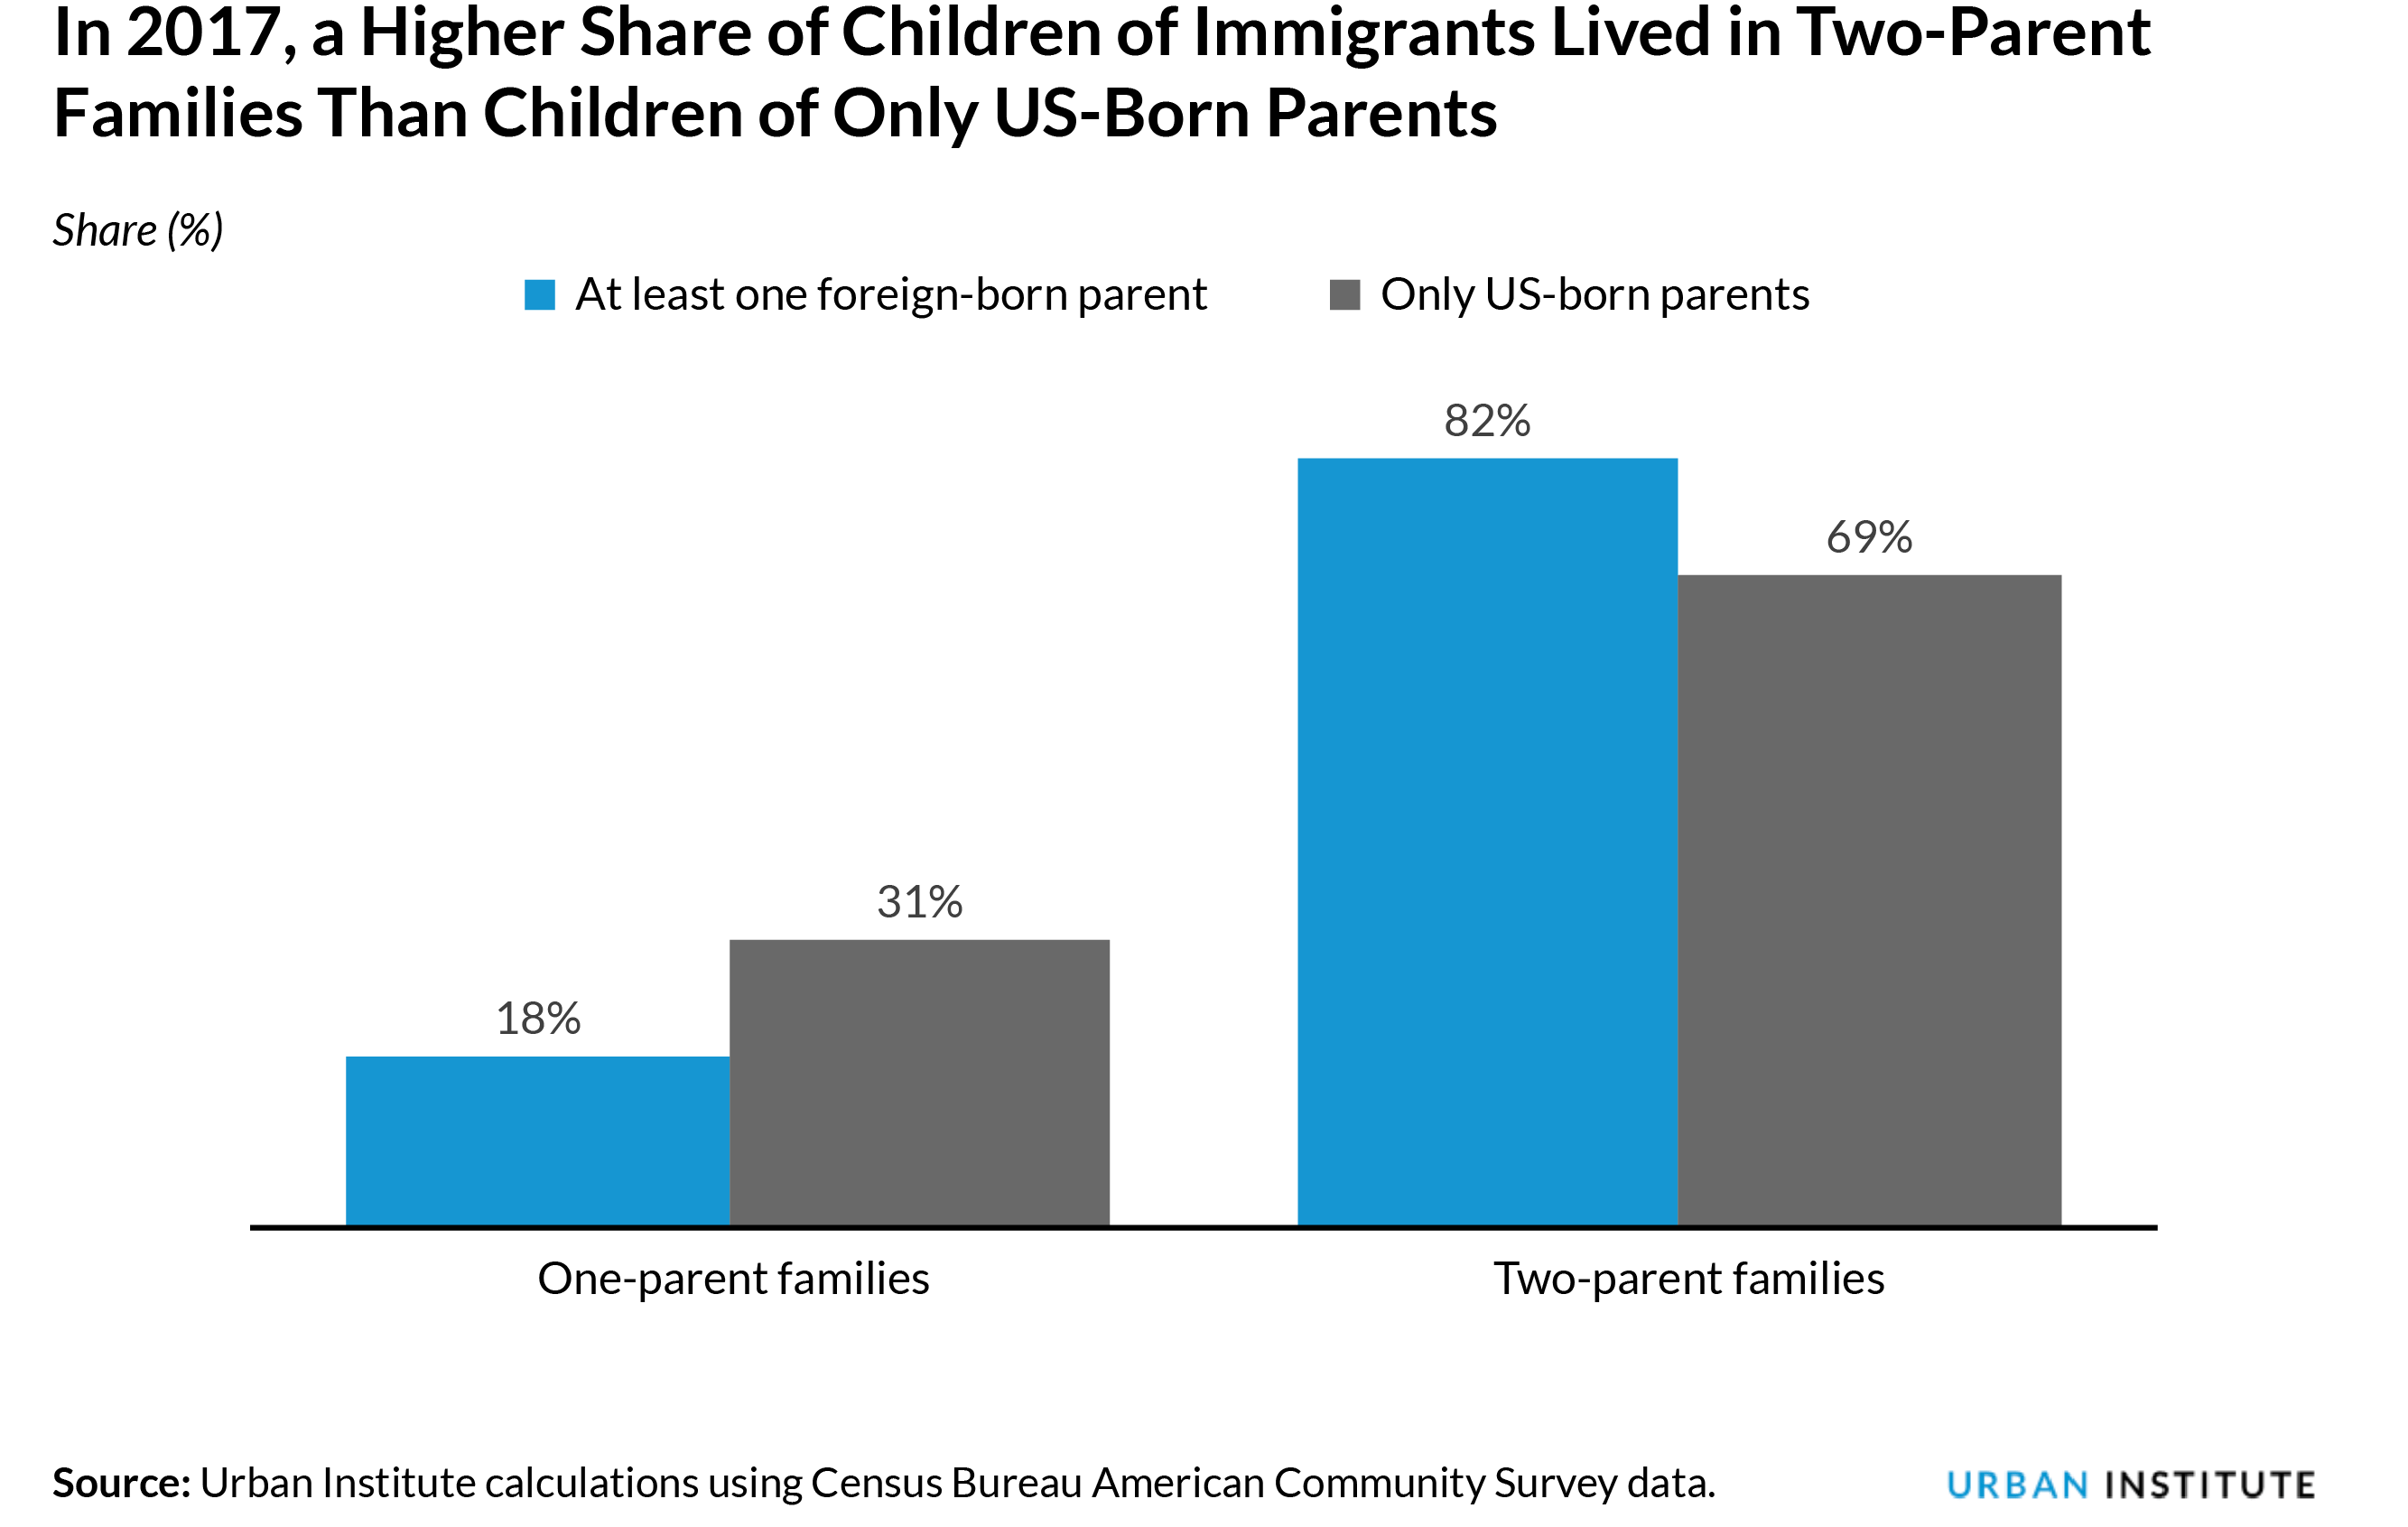 In 2017, a Higher Share of Children of Immigrants Lived in Two-Parent Families Than Children of Only US-Born Parents, Share (%)